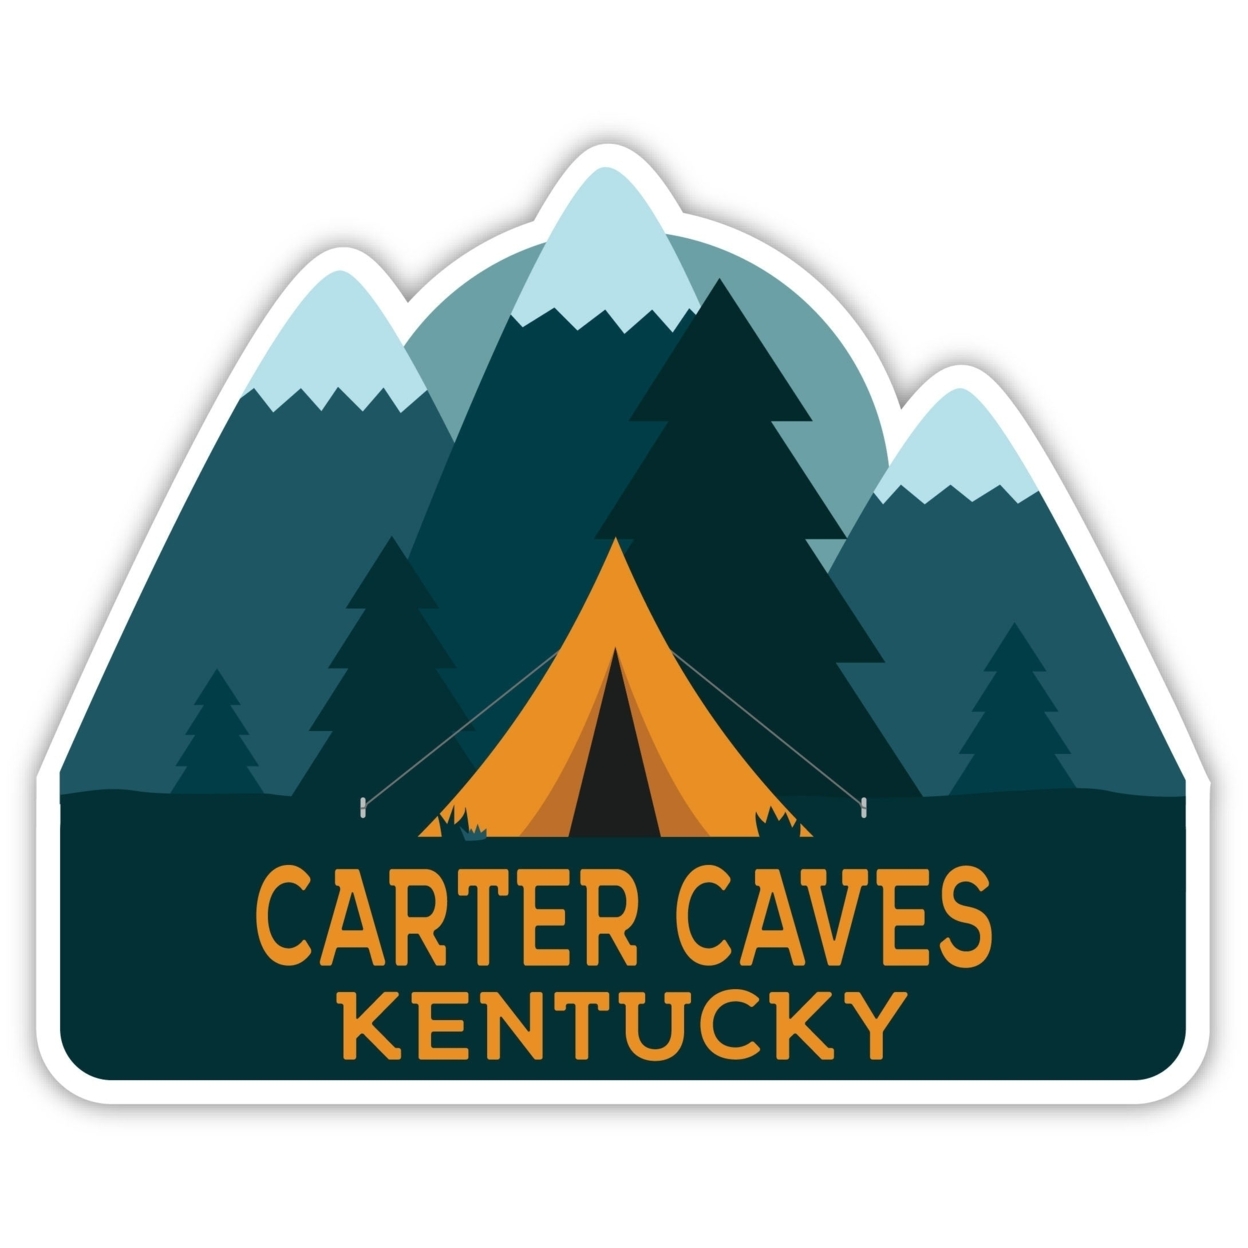 Carter Caves Kentucky Souvenir Decorative Stickers (Choose Theme And Size) - Single Unit, 8-Inch, Tent